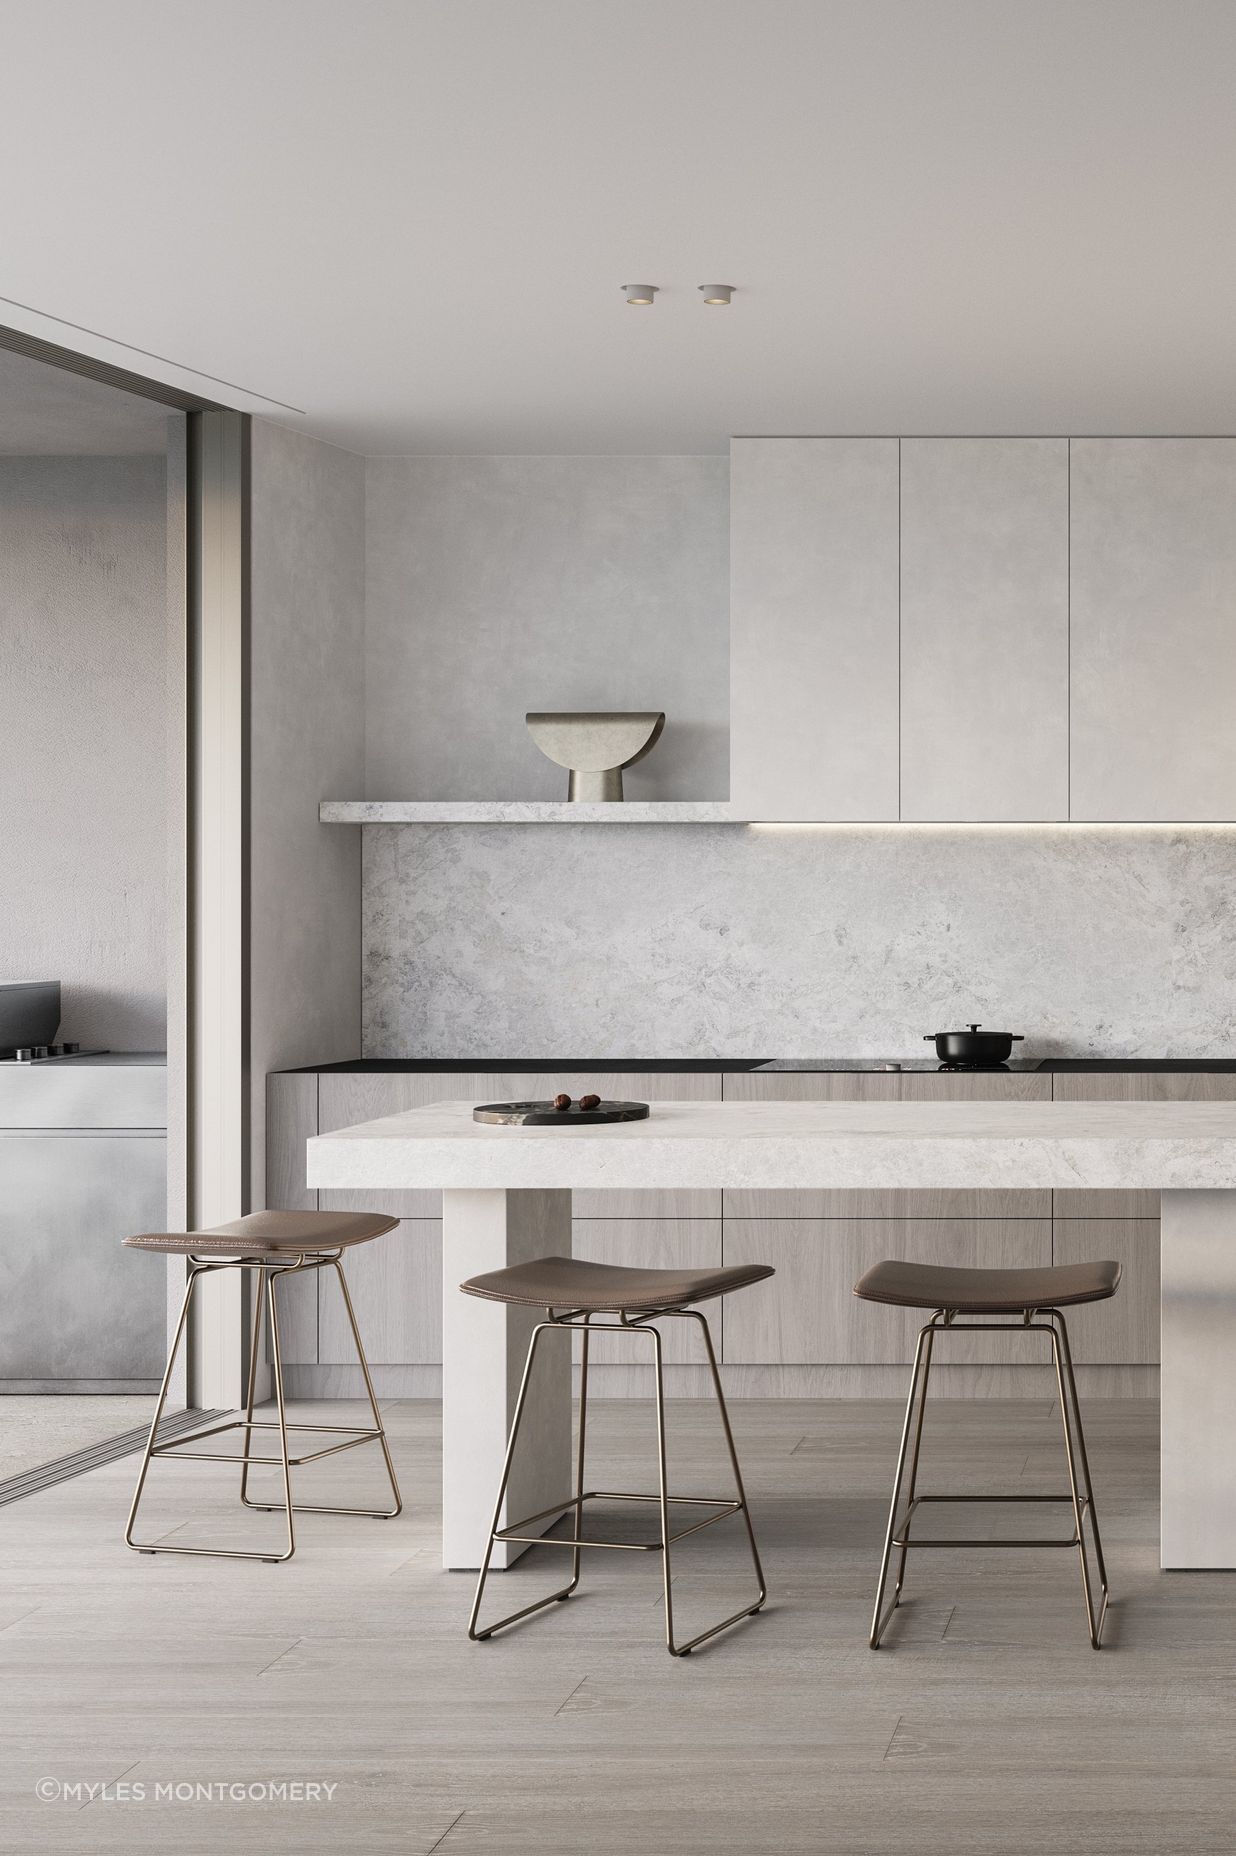 Marble-clad kitchens provide an anchor point for living and entertaining.